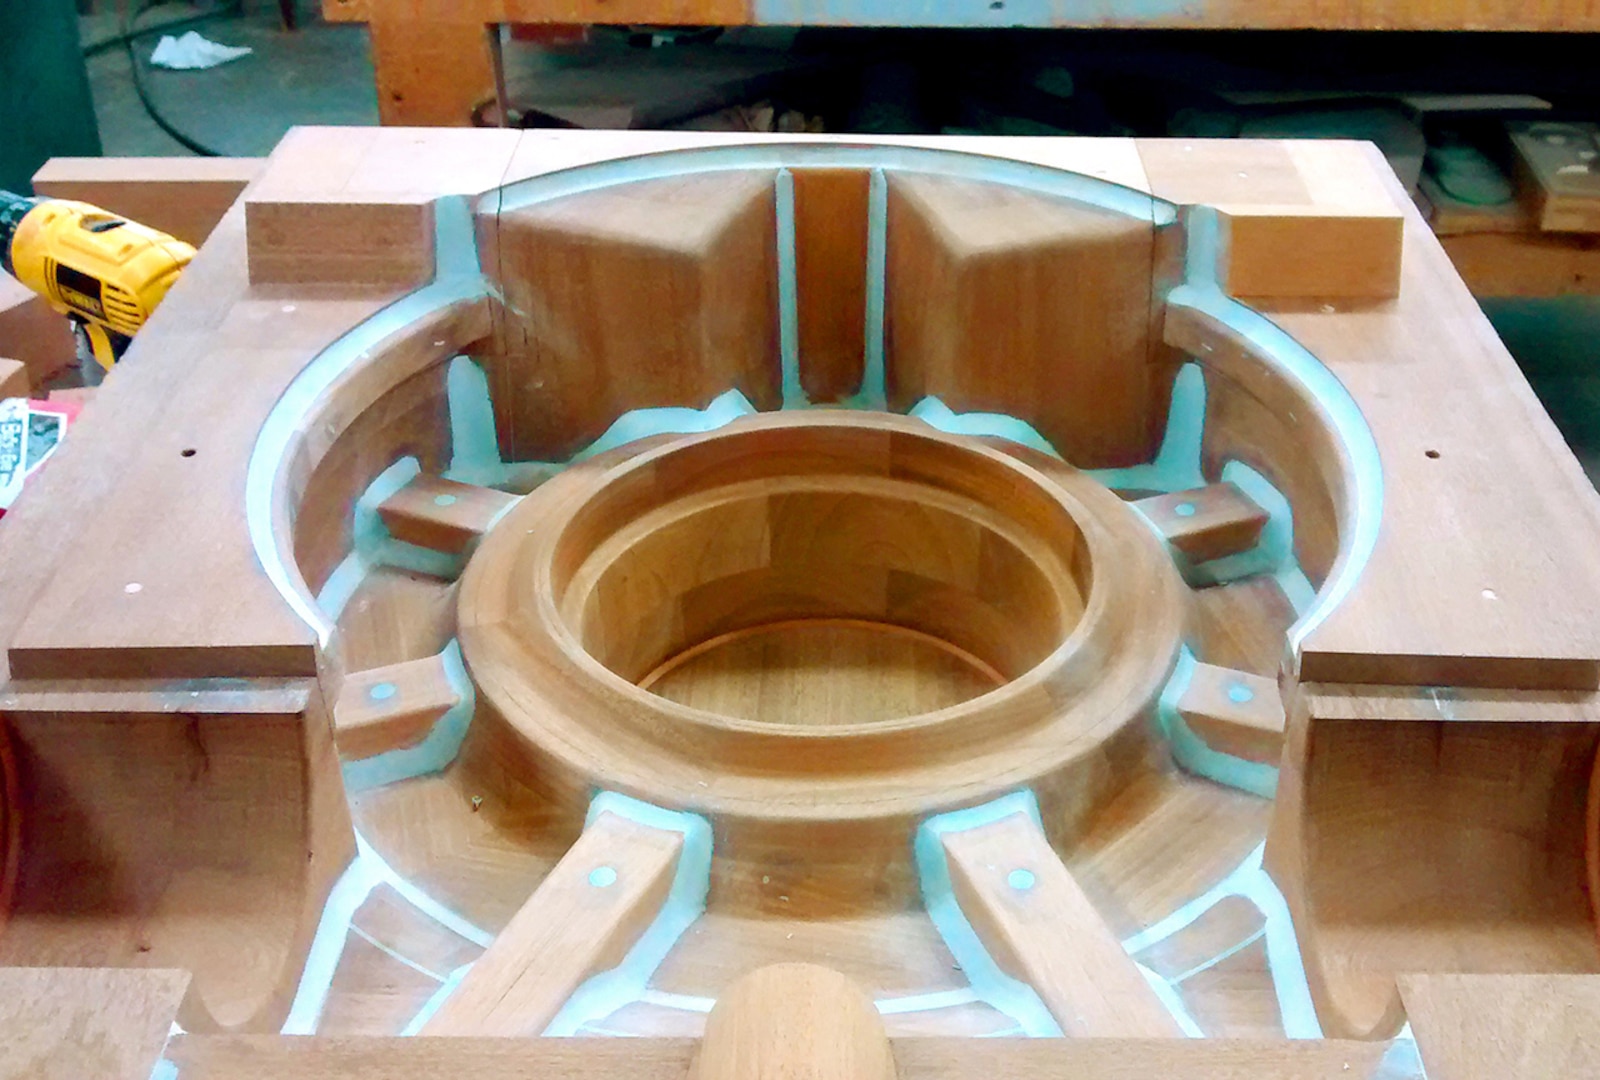 An old-fashioned casting pattern made of wood. Once a pattern is used to make a part, it is stored in a warehouse in case the foundry gets an order for the same part in the future.